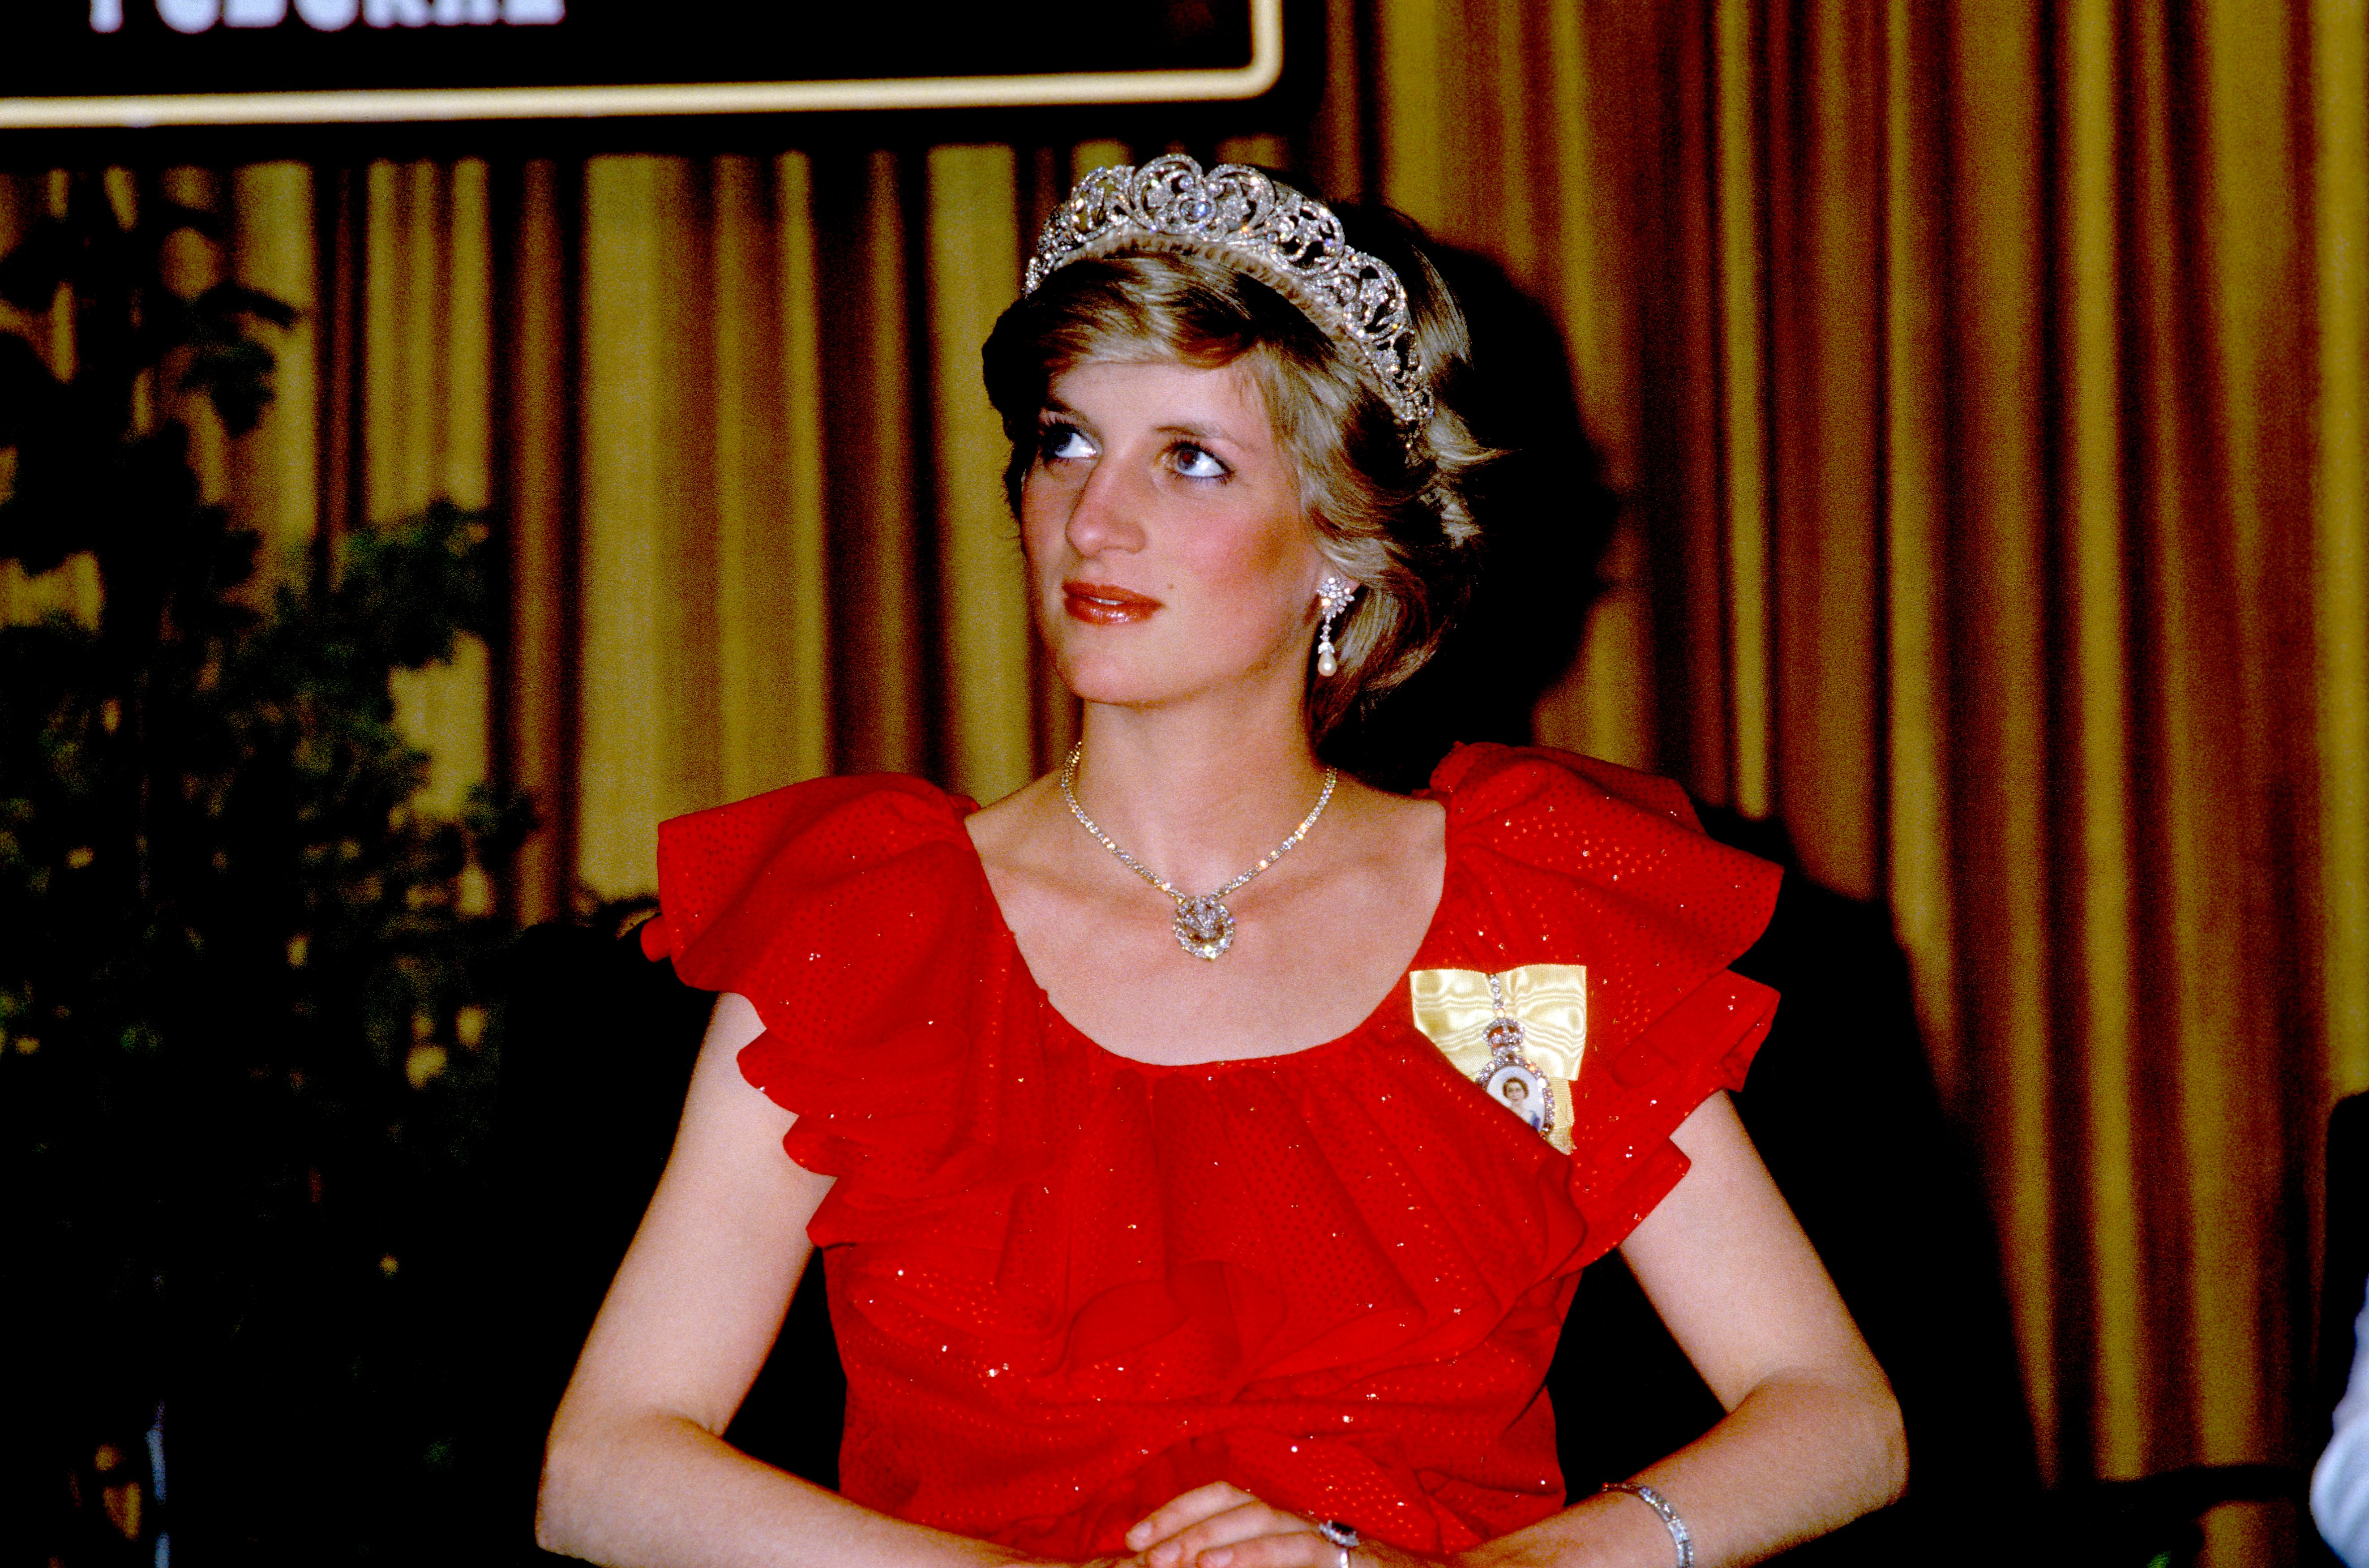 Princess Diana is wearing the Spencer family tiara and a dress by Bruce Oldfield on 30th March 1983 | Photo: Getty Images